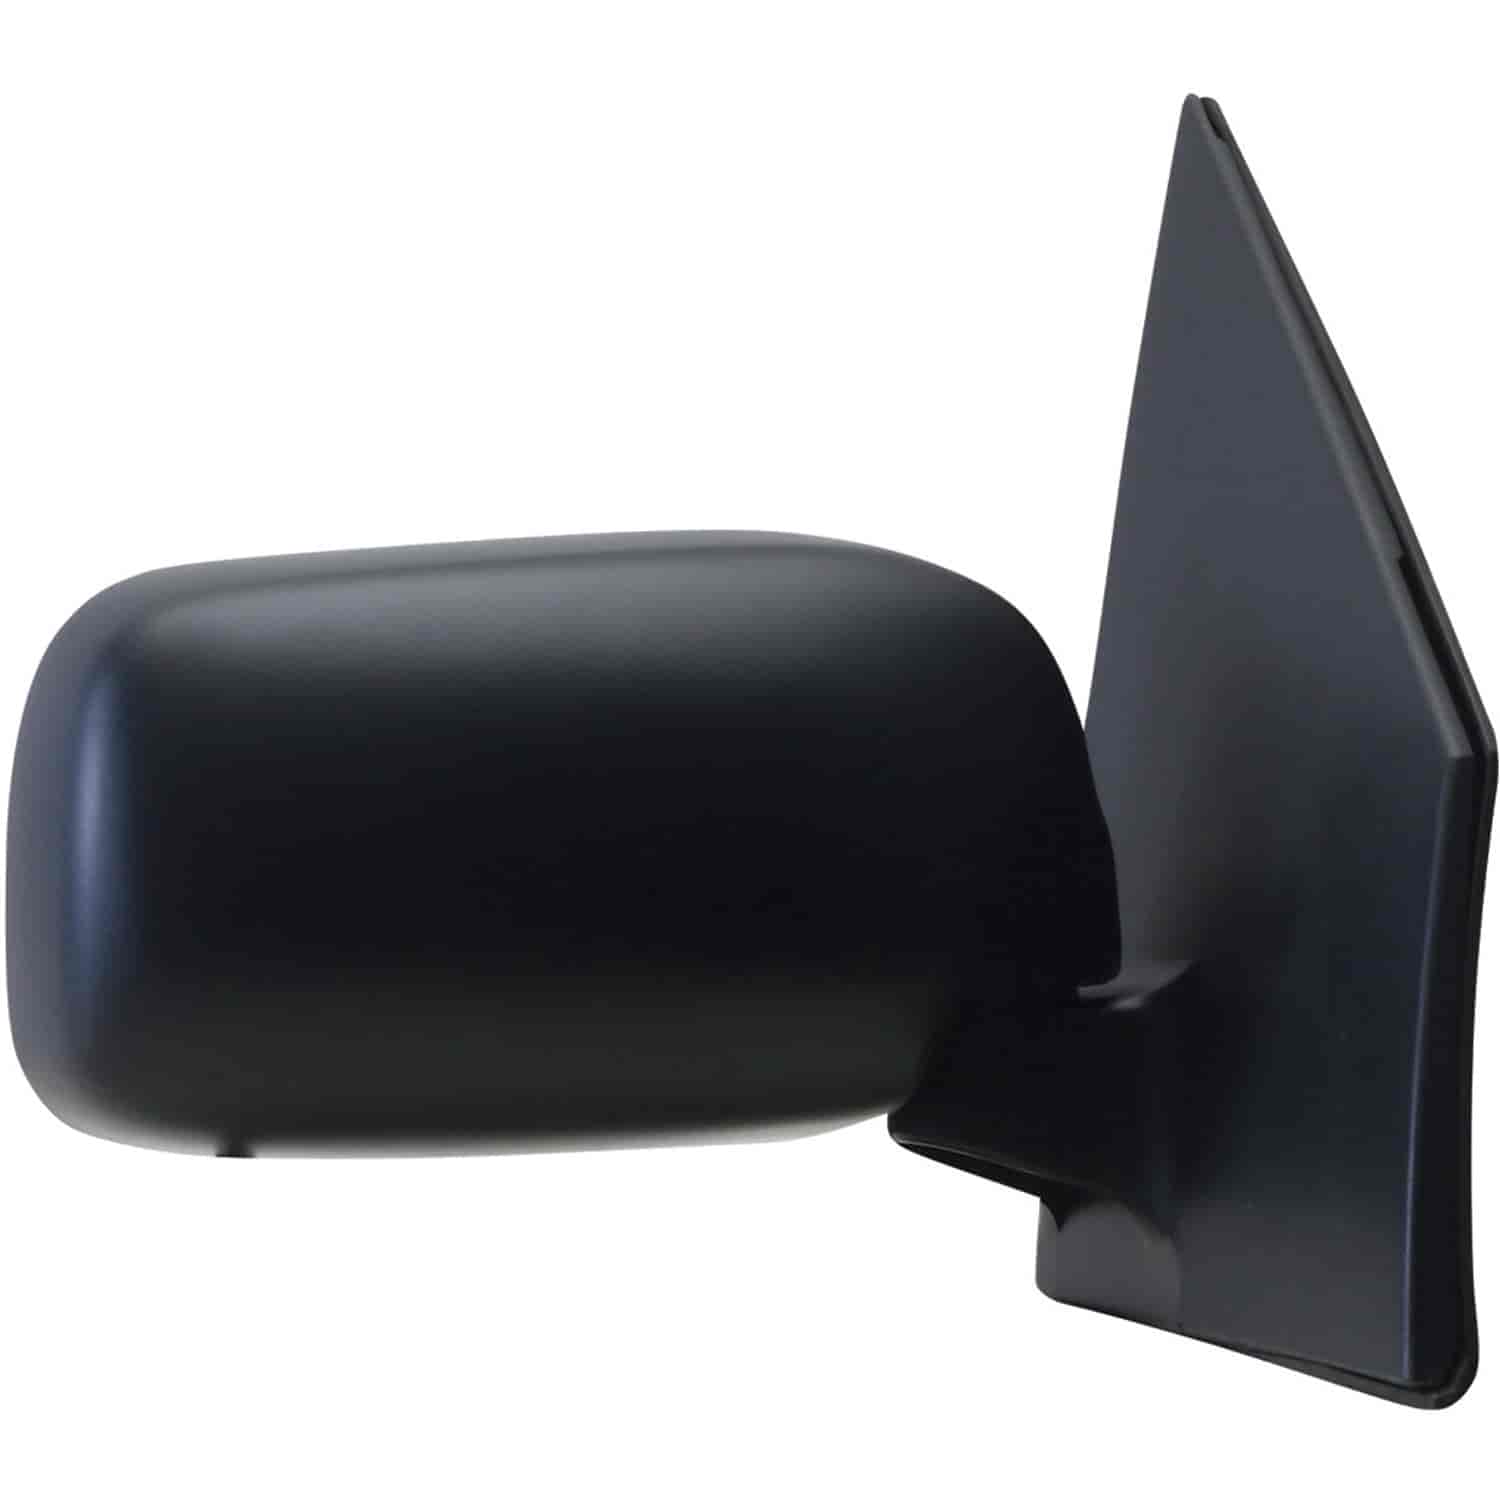 OEM Style Replacement mirror for 00-05 Toyota Echo 2 door/4 door passenger side mirror tested to fit